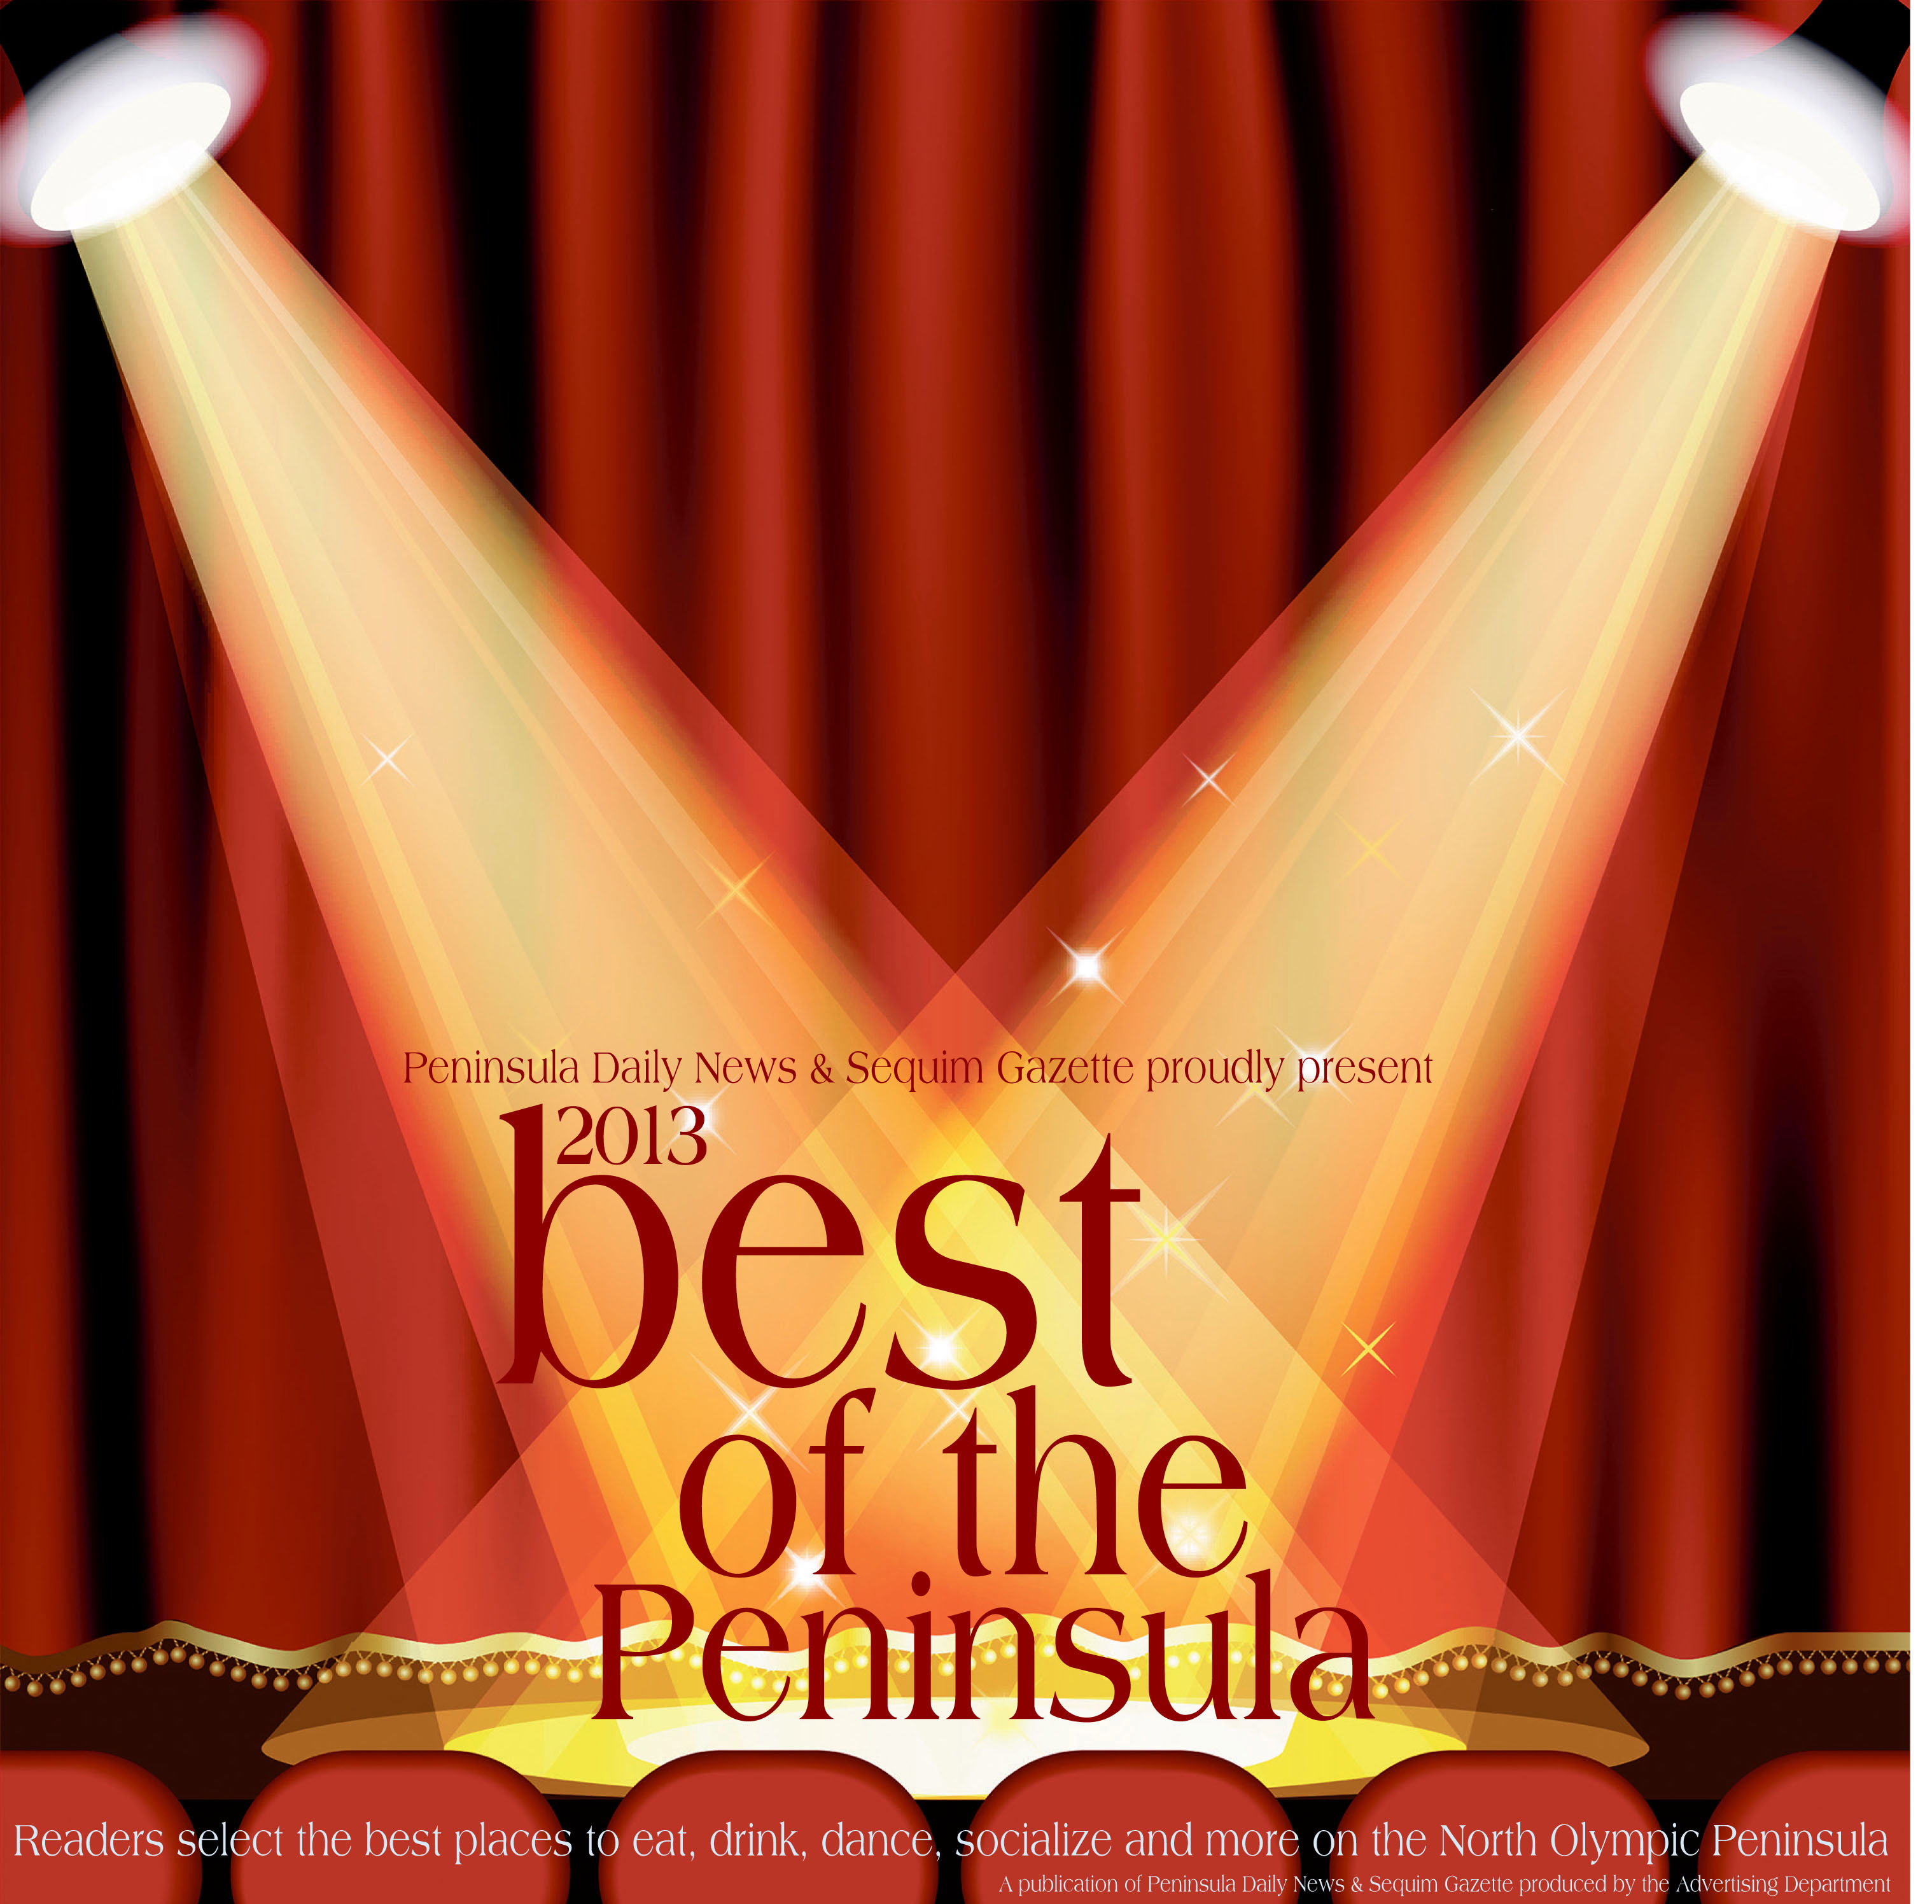 The 2013 Best of the Peninsula!